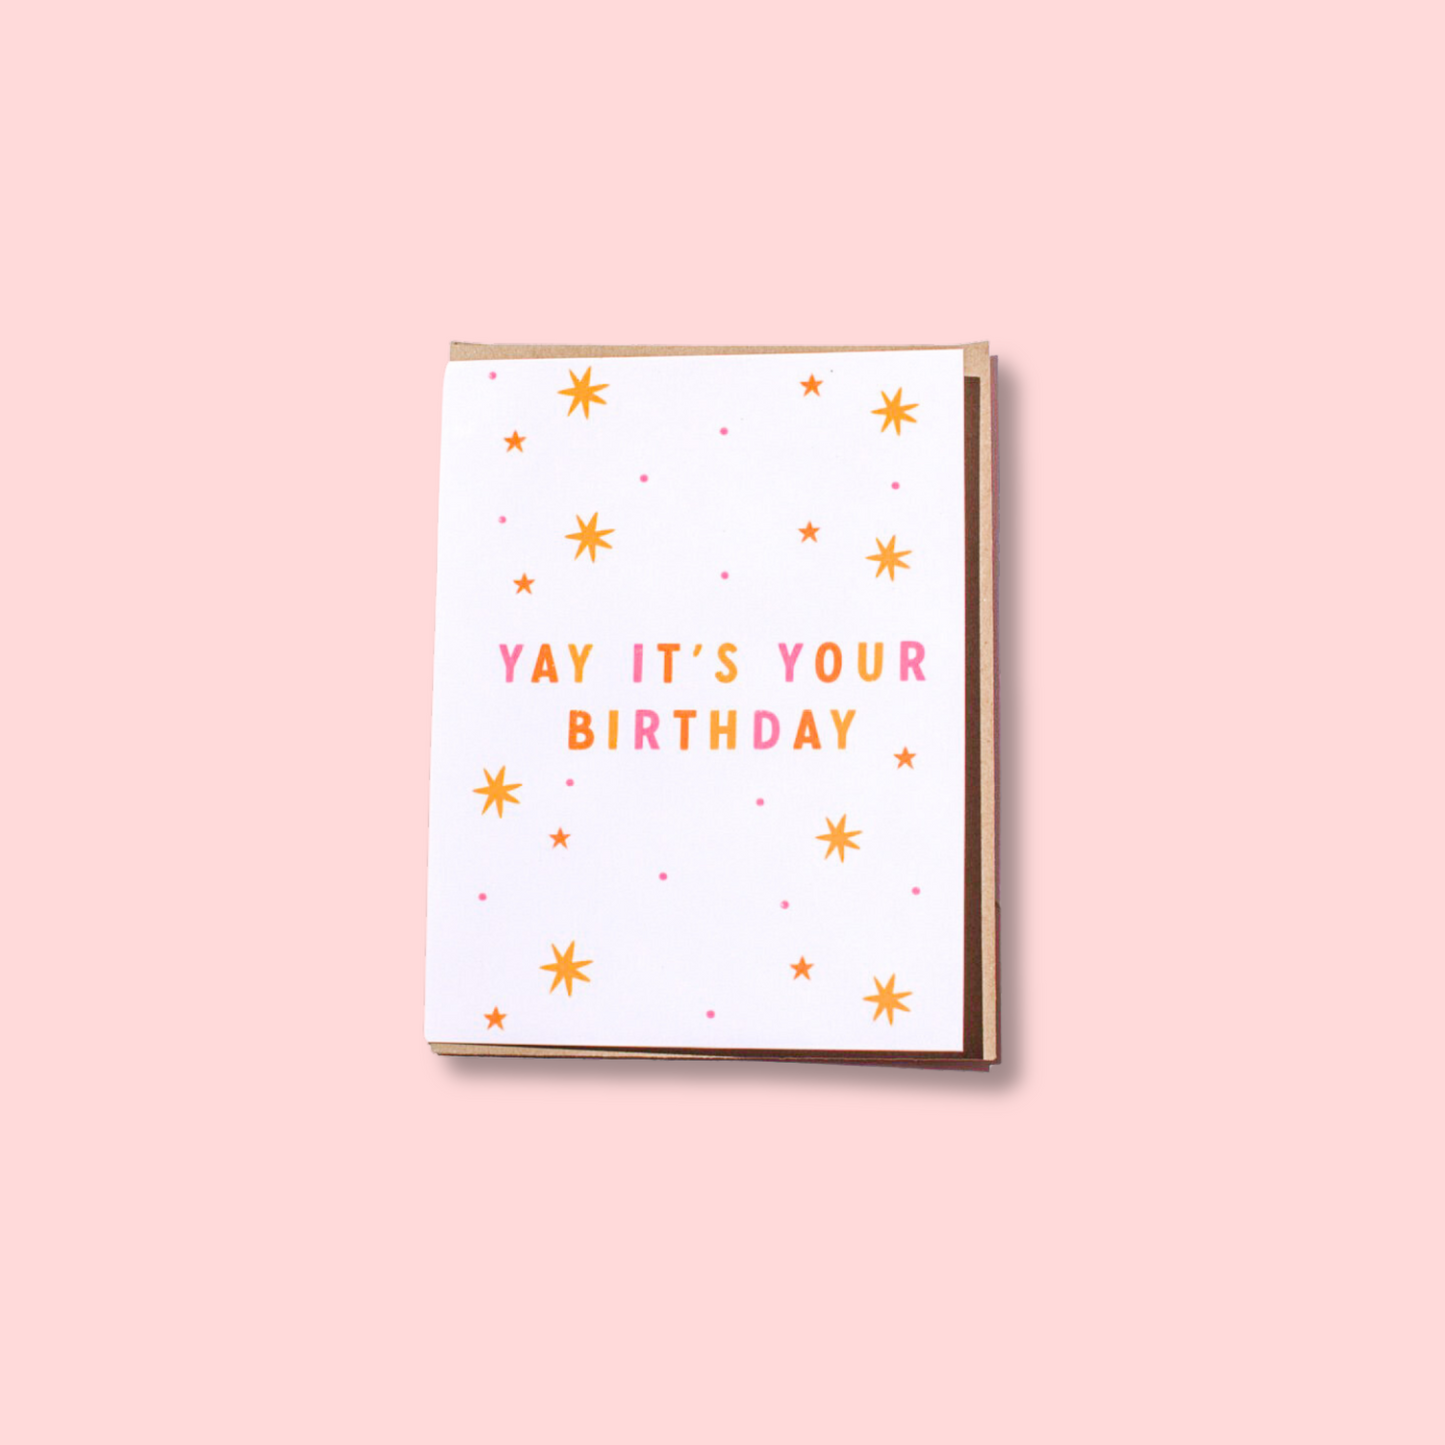 Yay It's Your Birthday Greeting Card